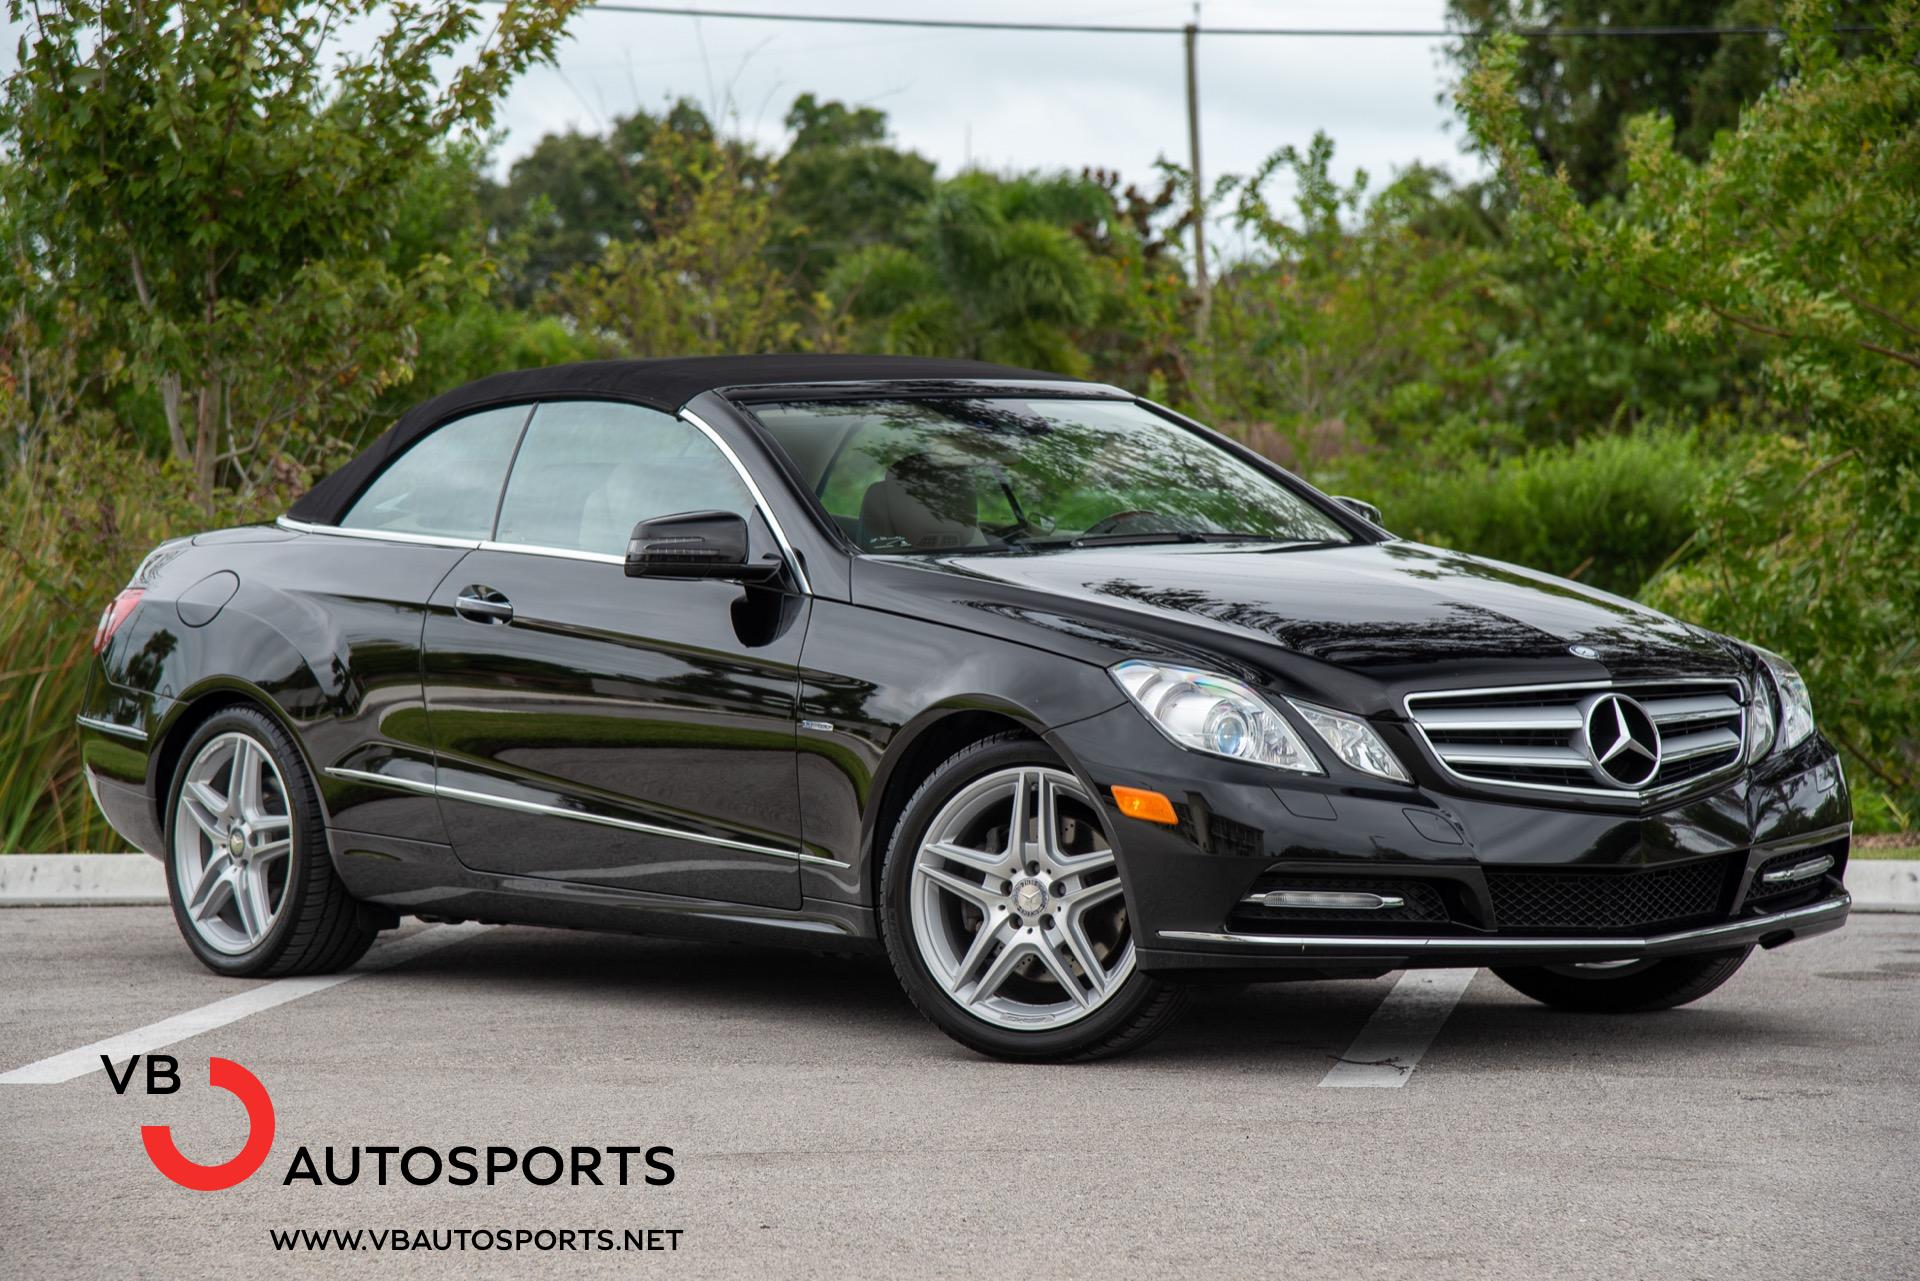 Used 12 Mercedes Benz E Class E 350 Premium 2 Launch Package For Sale Sold Vb Autosports Stock Vb003